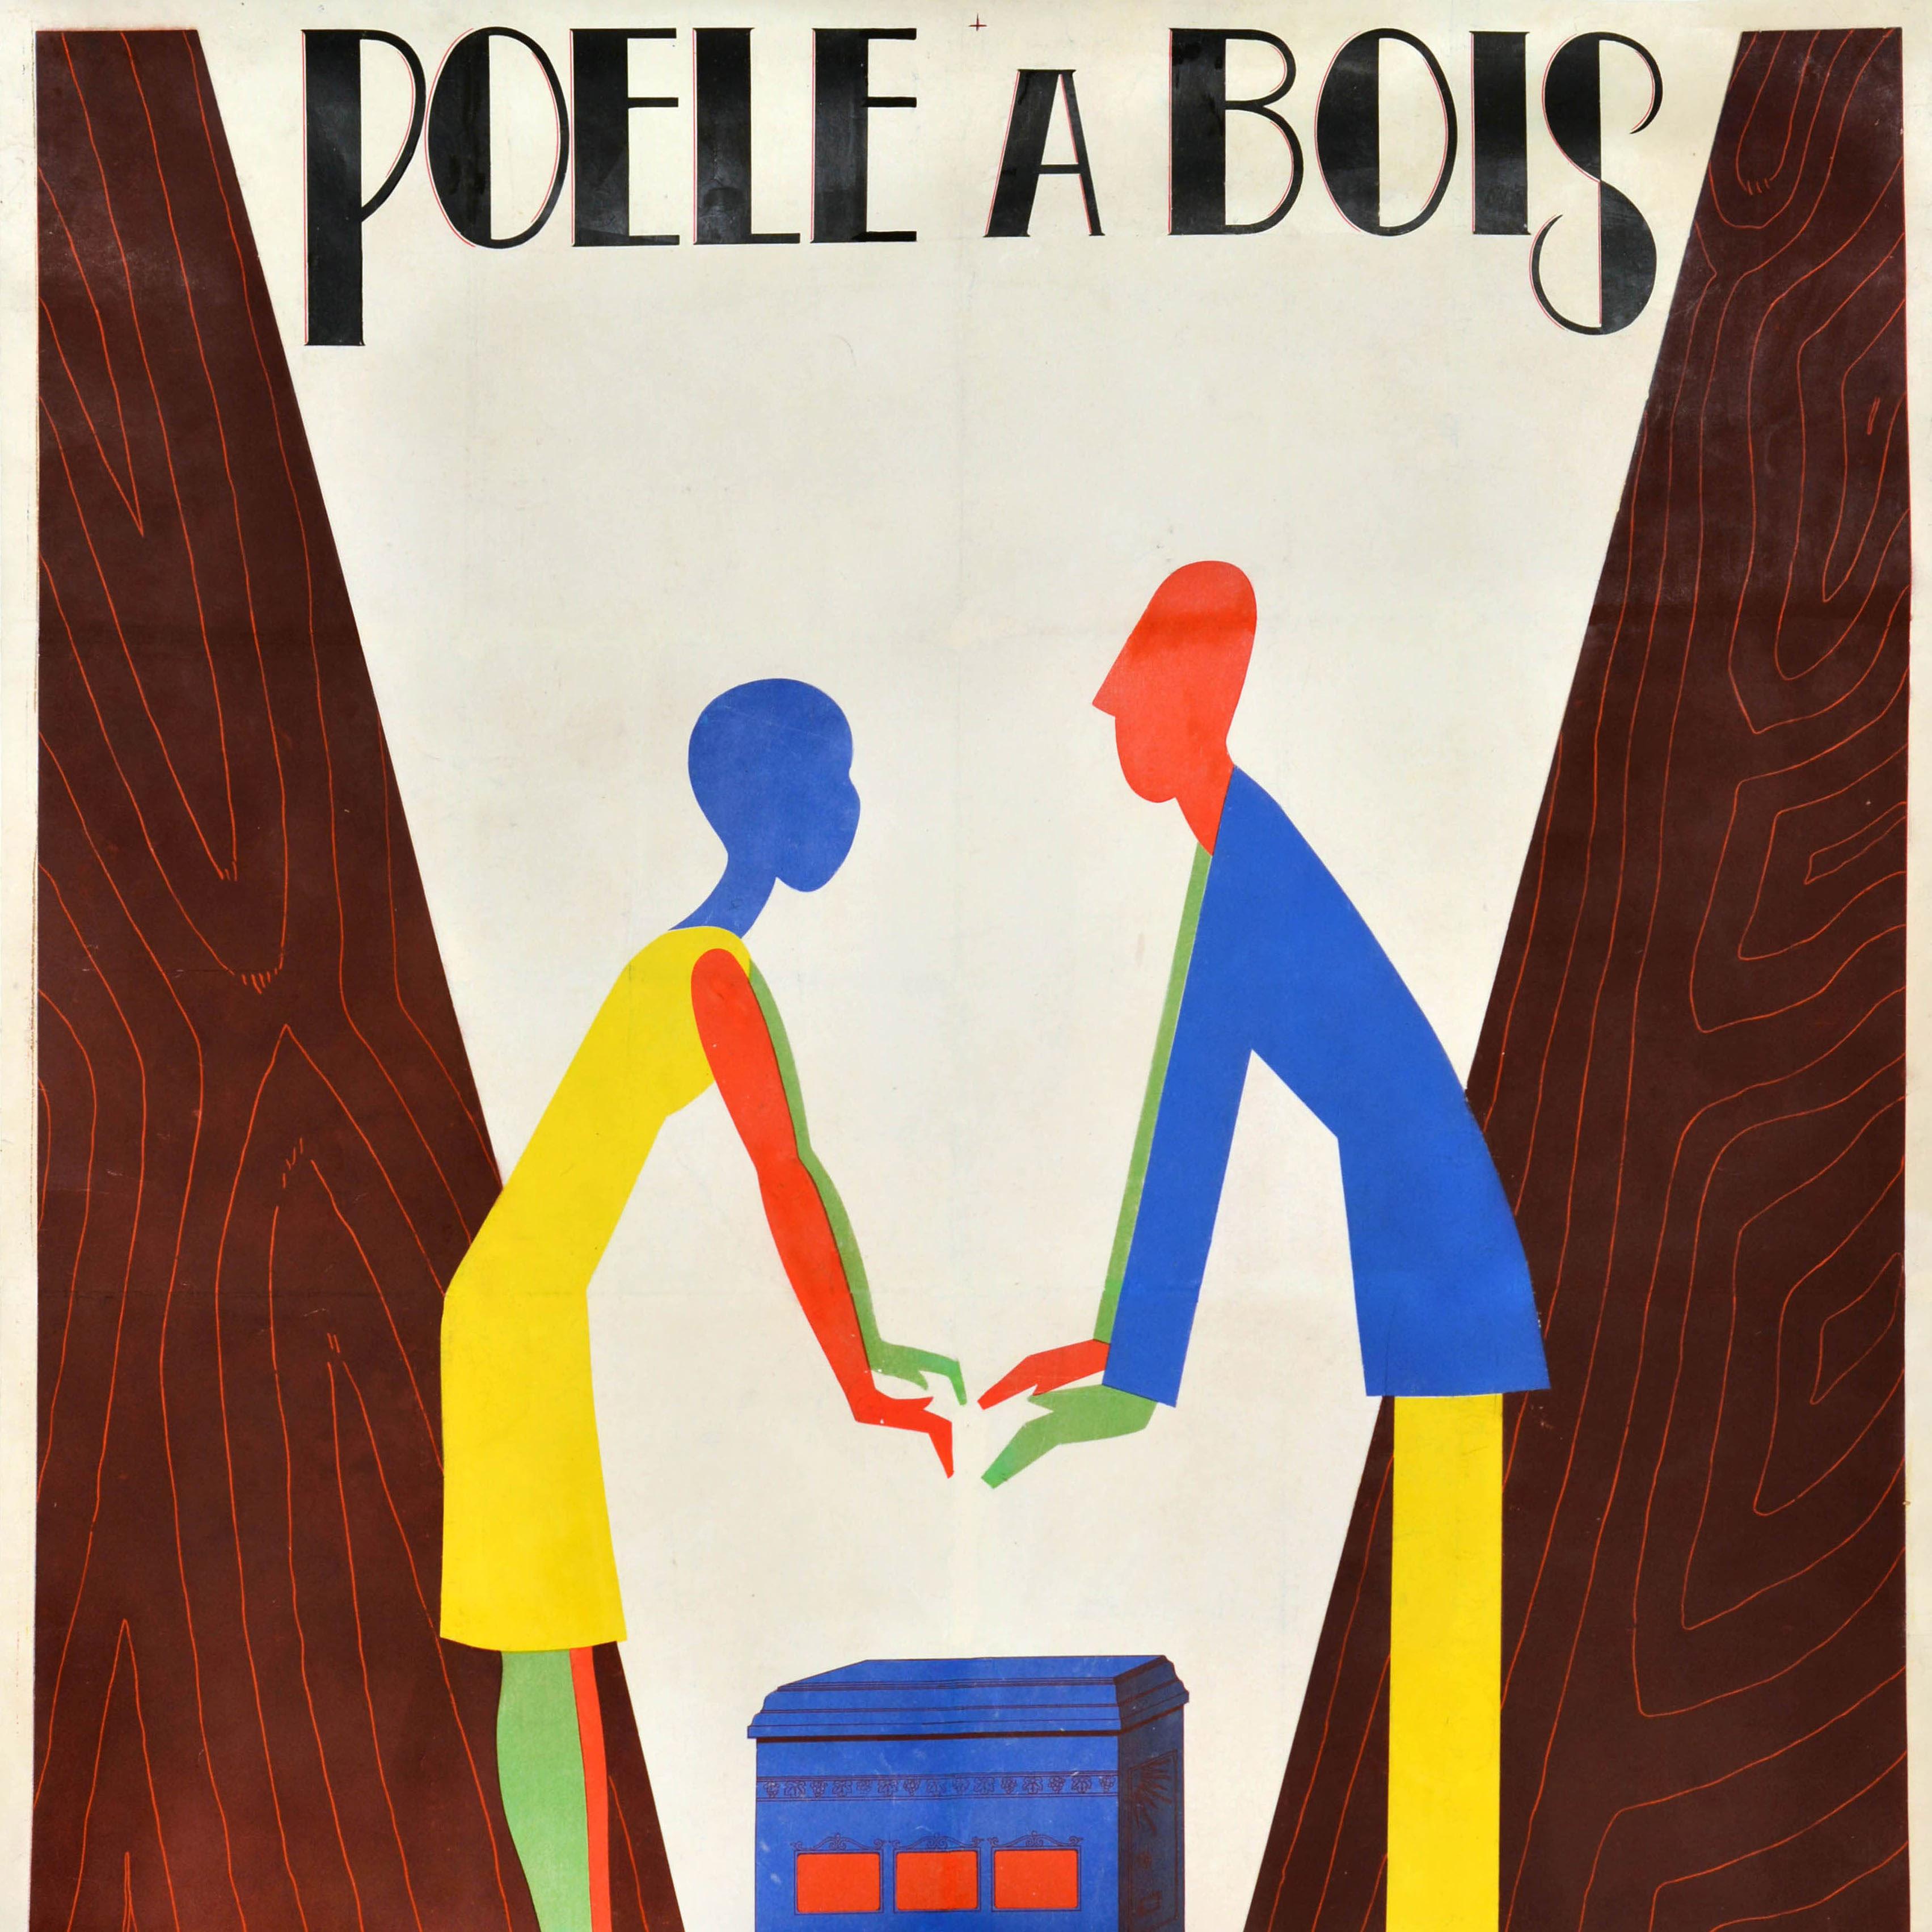 French Original Antique Advertising Poster Mirus Poele A Bois Wood Stove Heater France For Sale